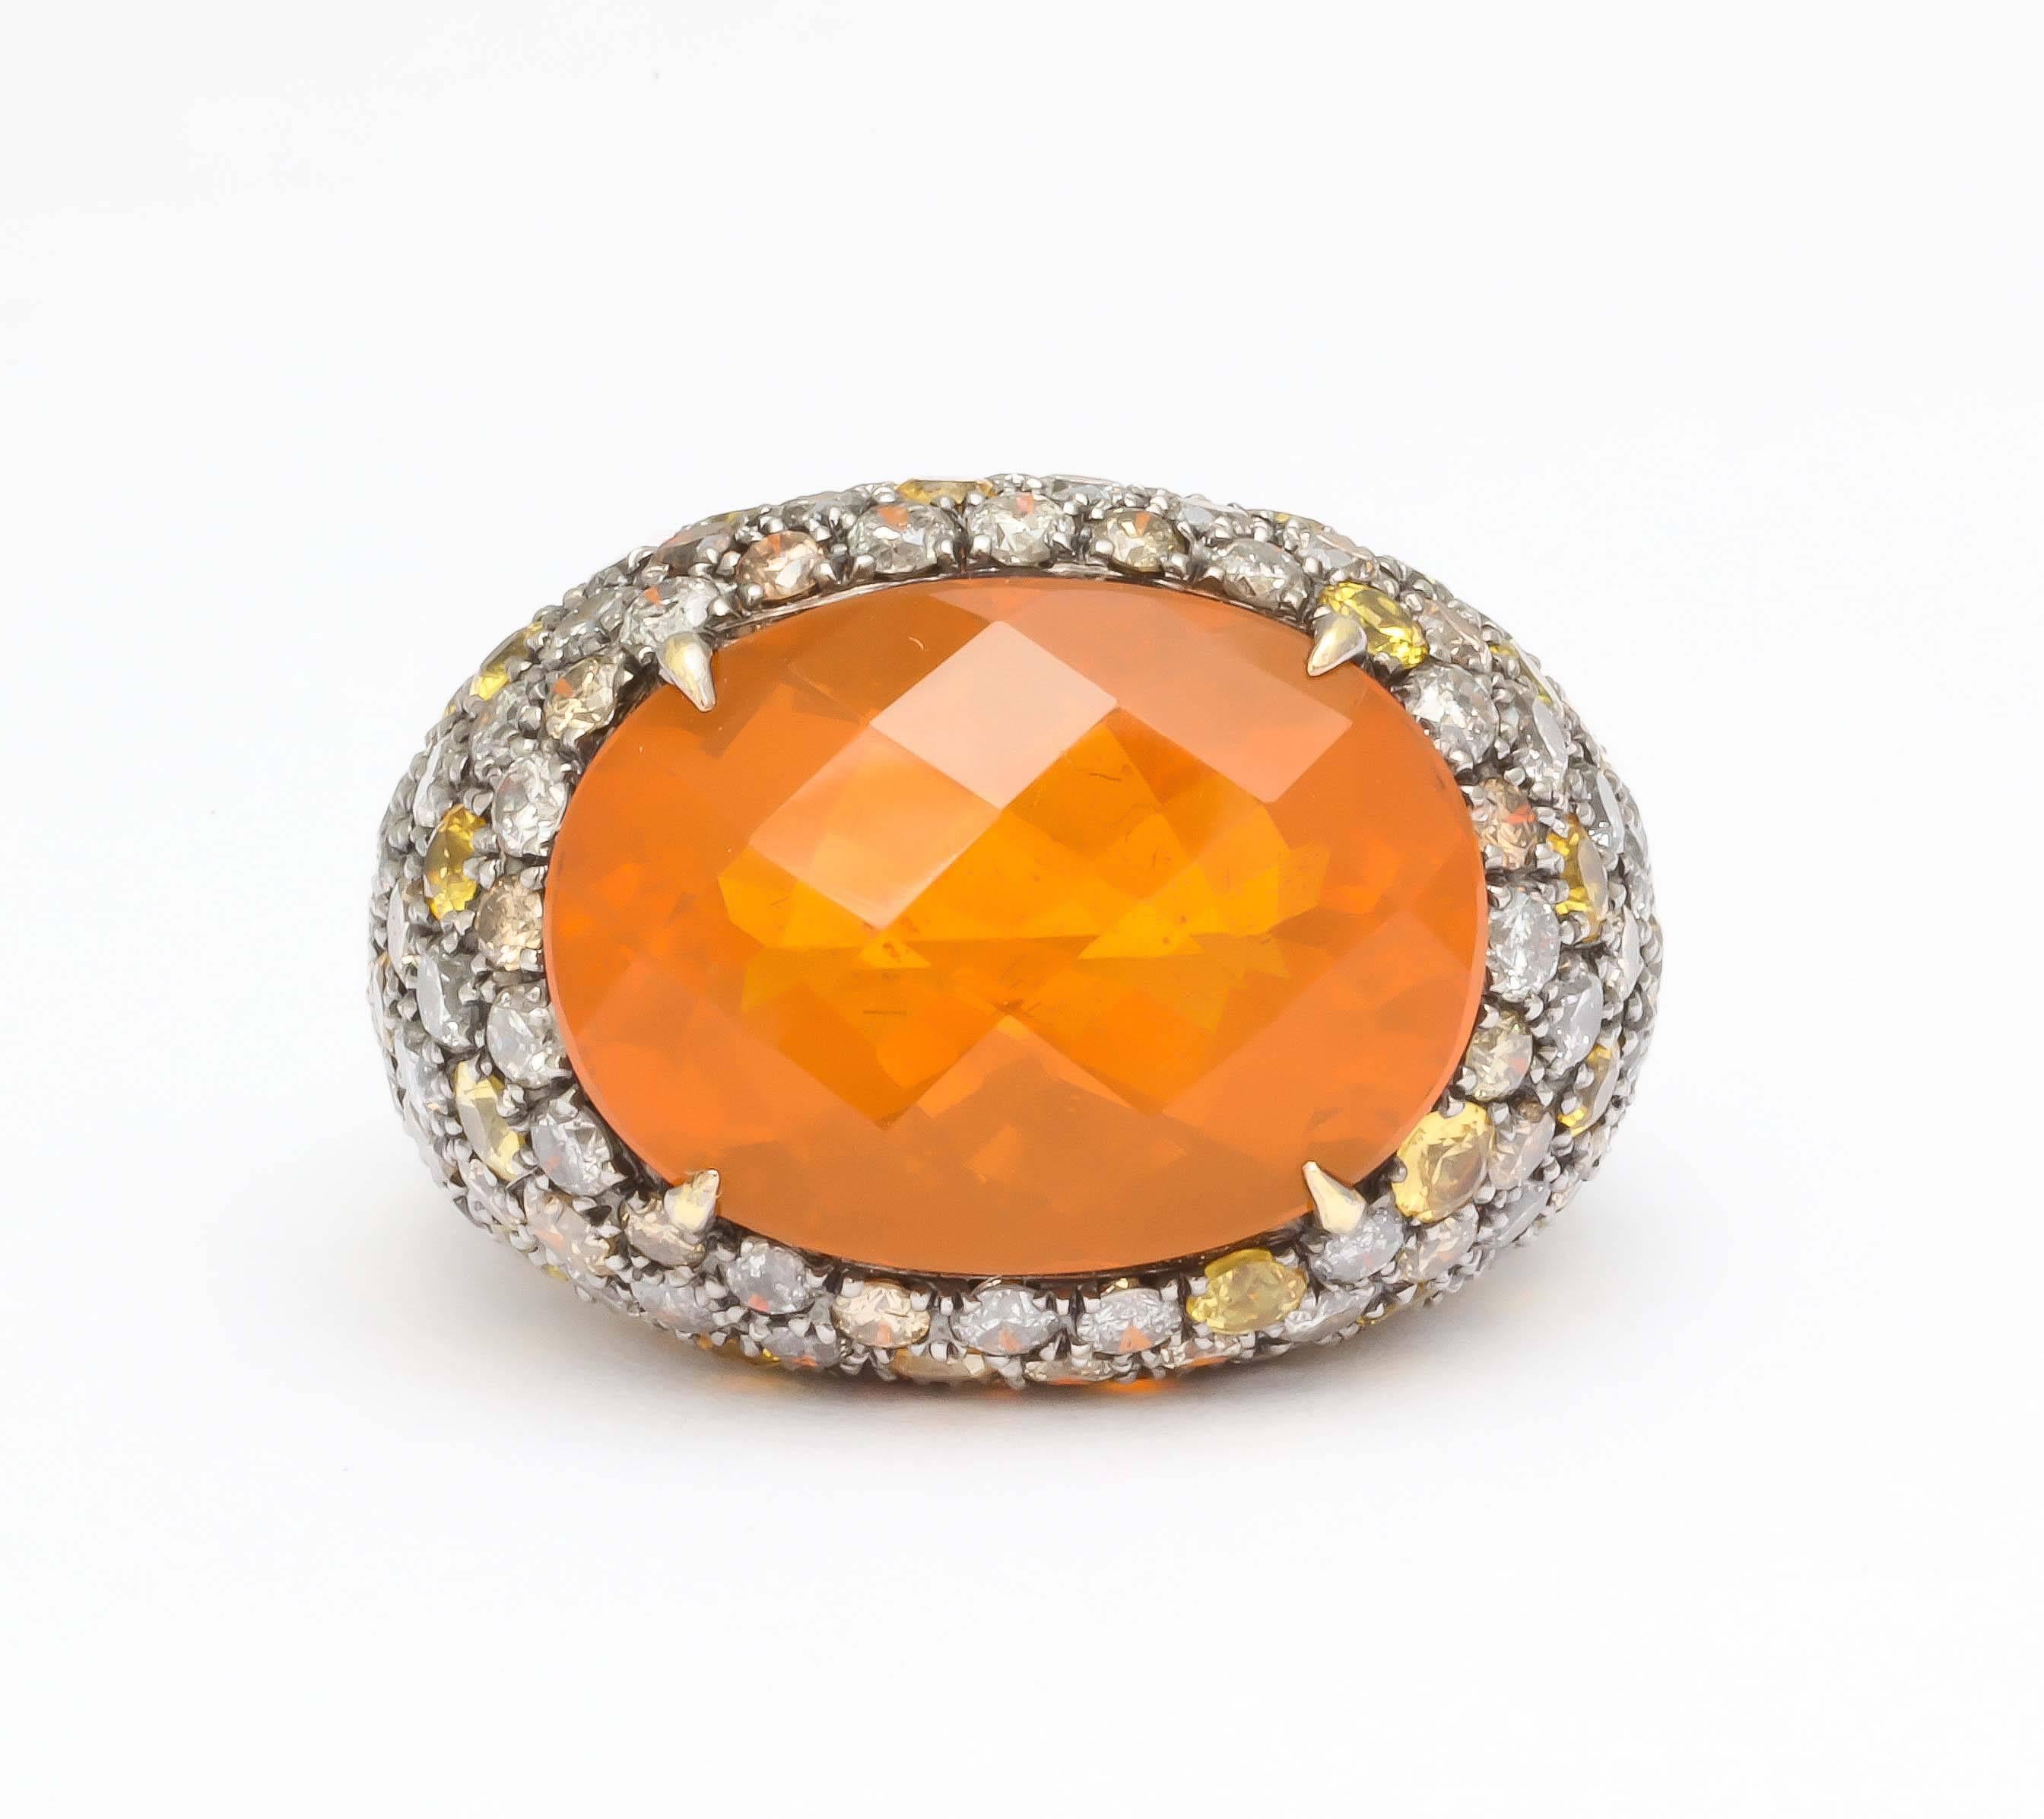 18k yellow and white gold oval fire opal ring with pave gray & brown diamond and sapphire mounting 
center oval opal weighs approximately 9.4 ct.
diamonds weigh approximately 5.00 ct. 
yellow & orange sapphires approximately 2.75 ct.